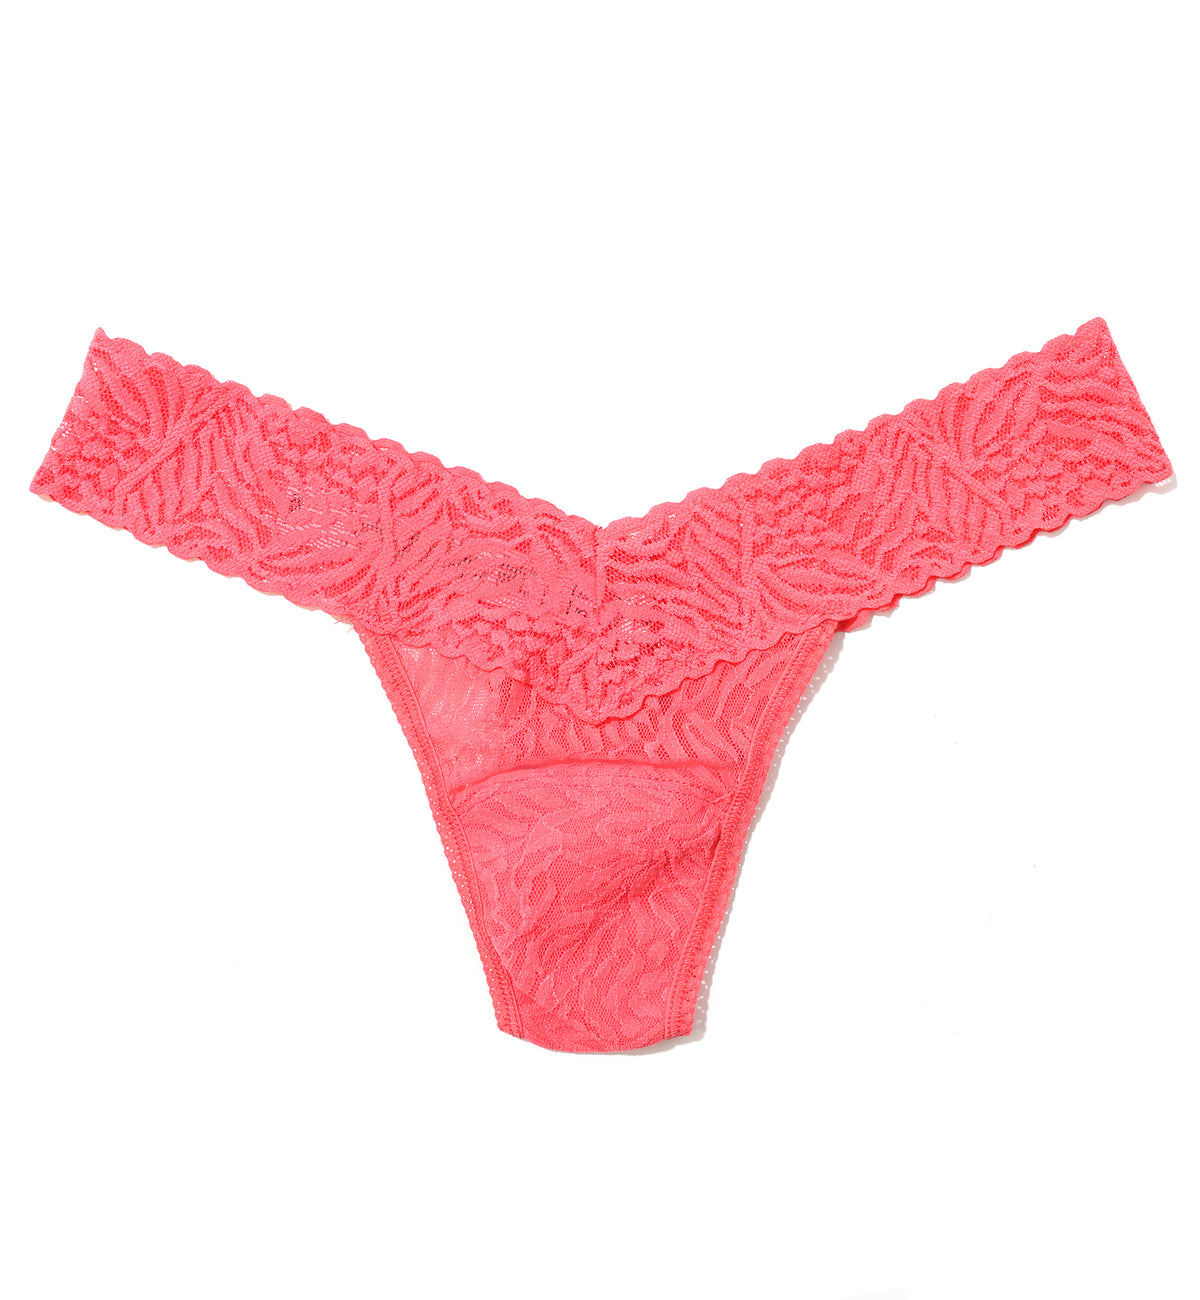 Hanky Panky Animal Instincts Low Rise Thong (AM1051P),Wild Card - Wild Card,One Size